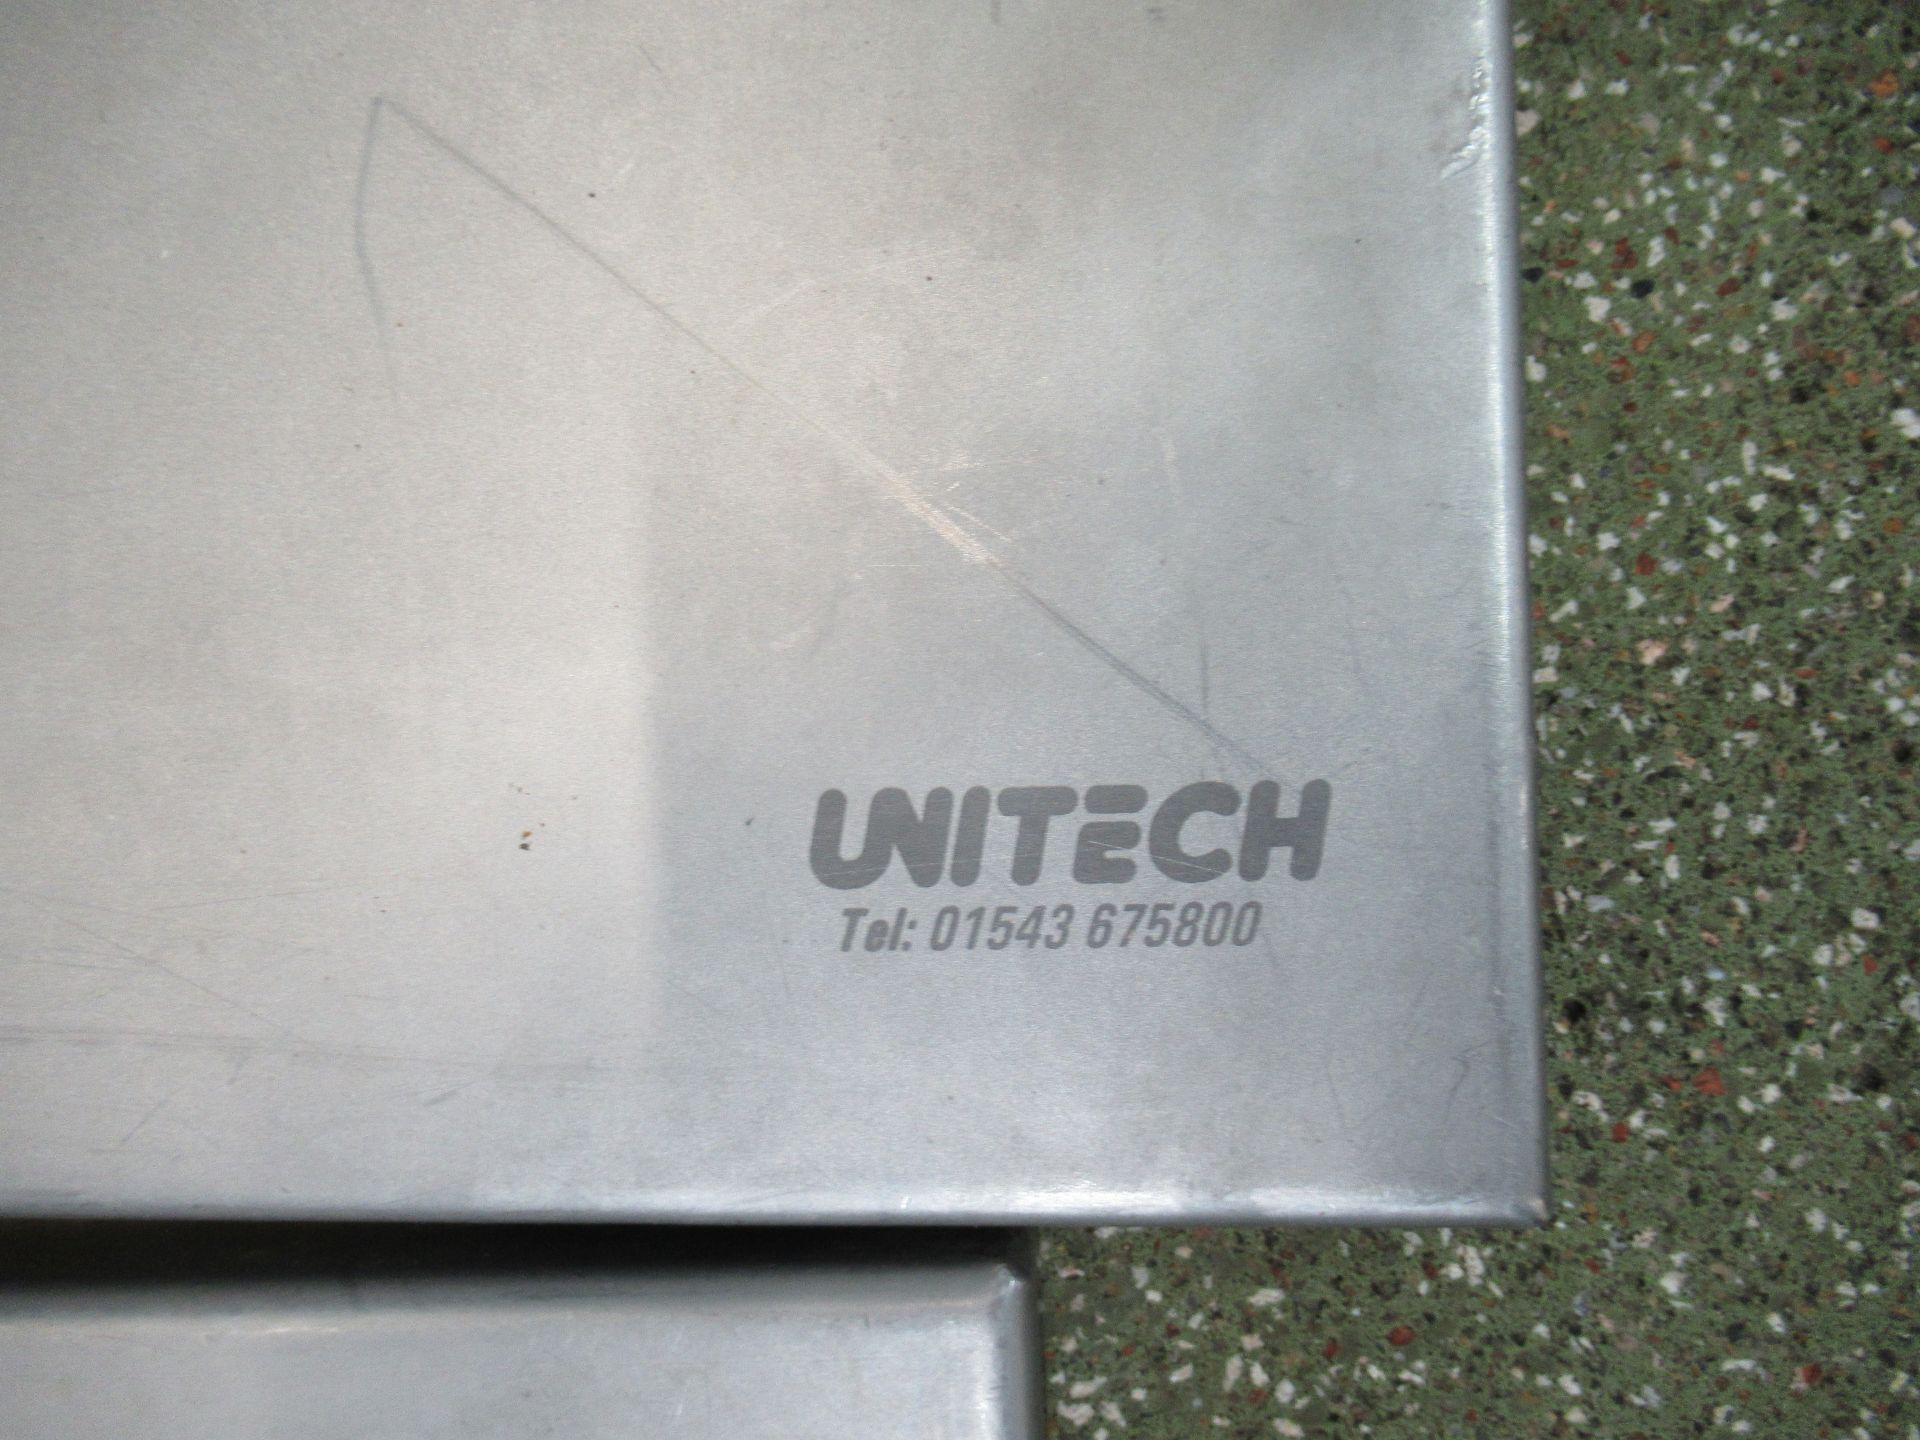 8 Unitech stainless steel waste bag holders - Image 4 of 5